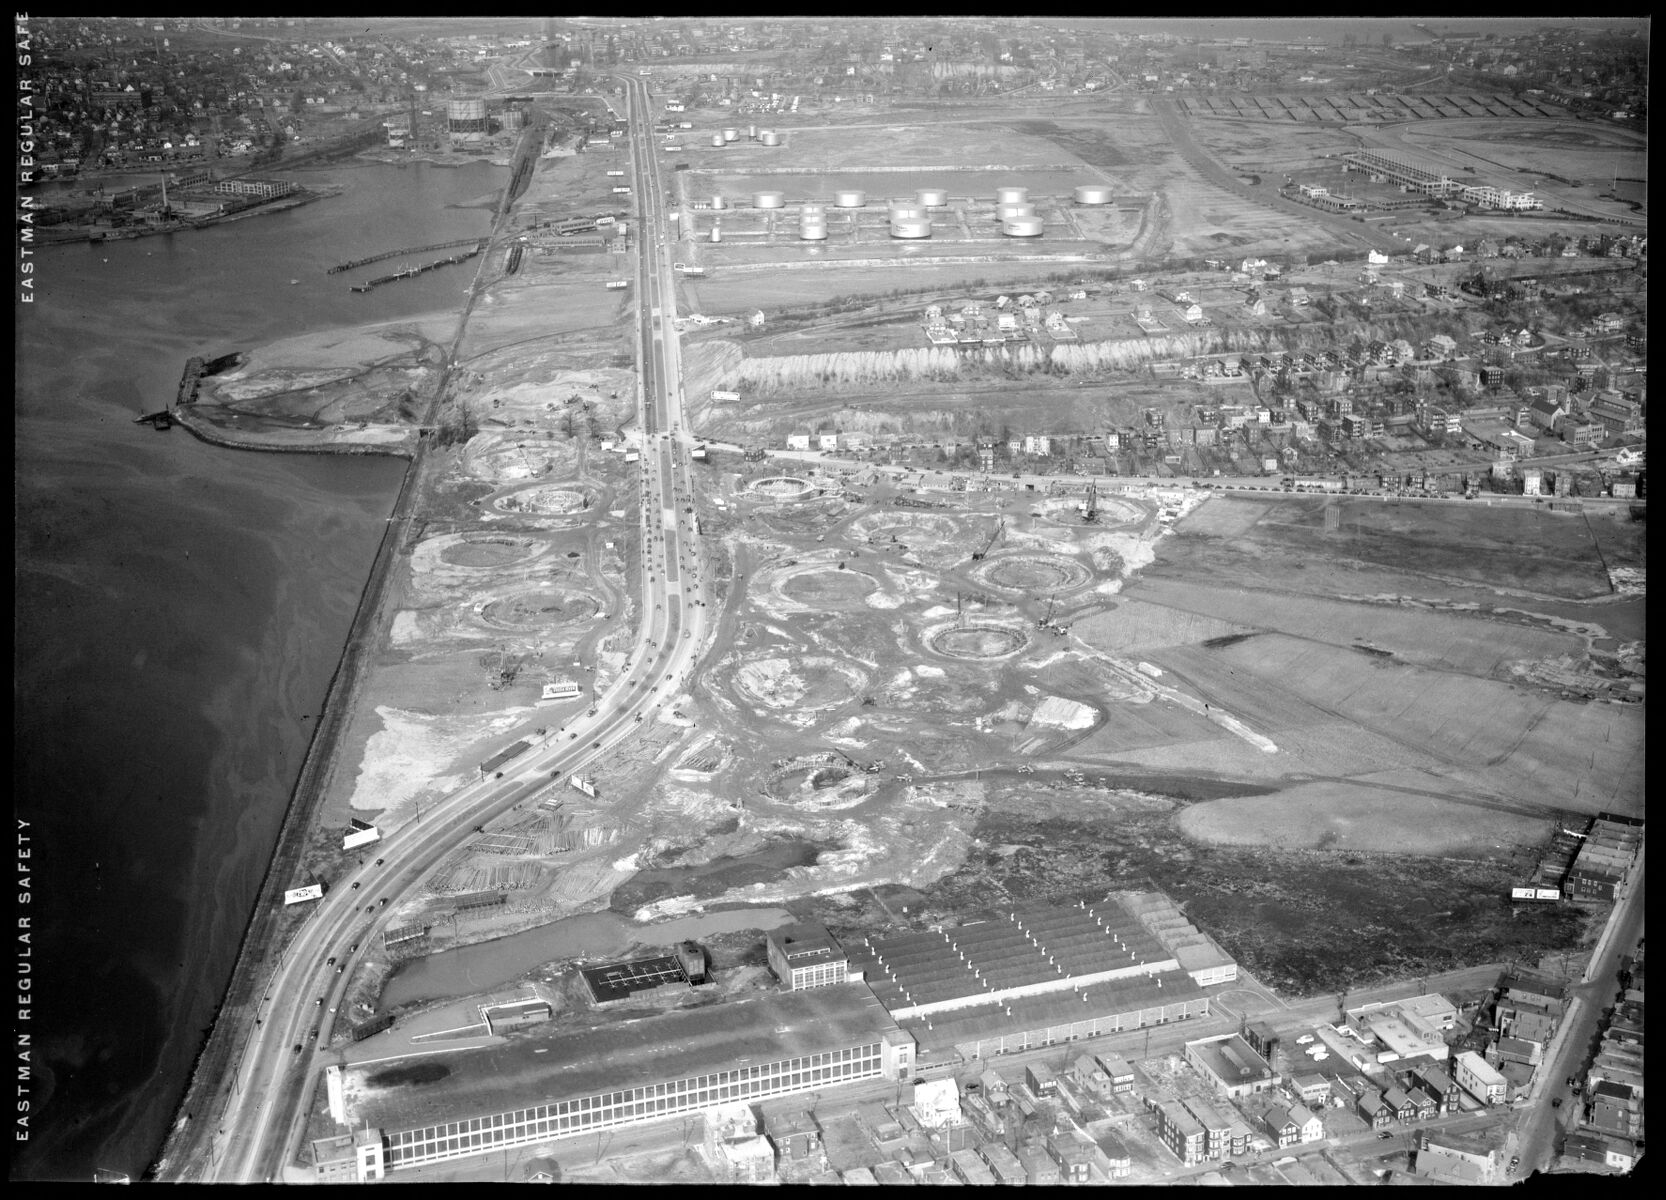 Looking northeast over the oil farm in Revere around 1940 (National Archives Boston)